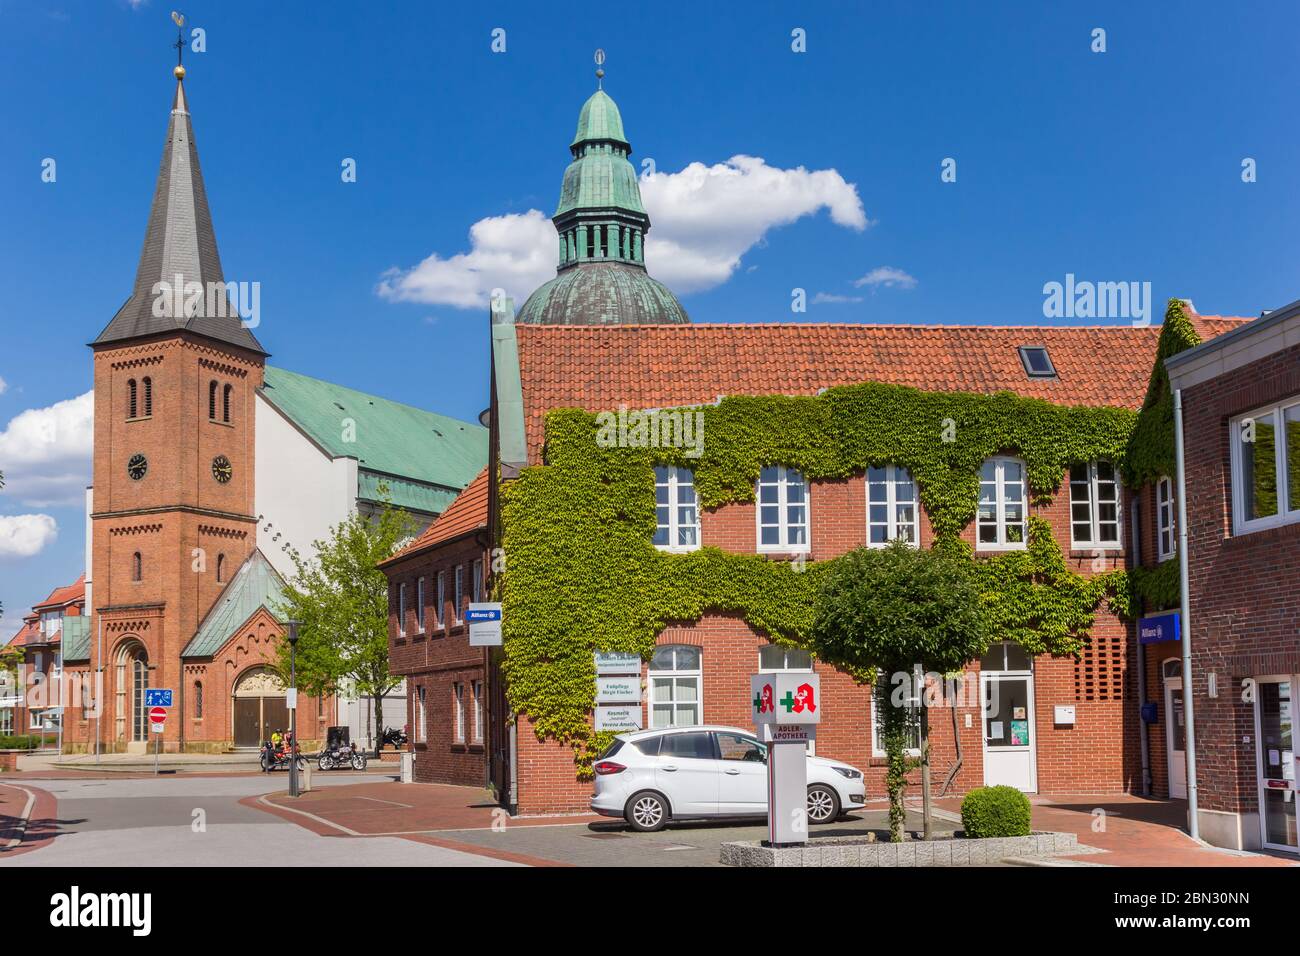 Central street with Emsland Dom church in Haren, Germany Stock Photo